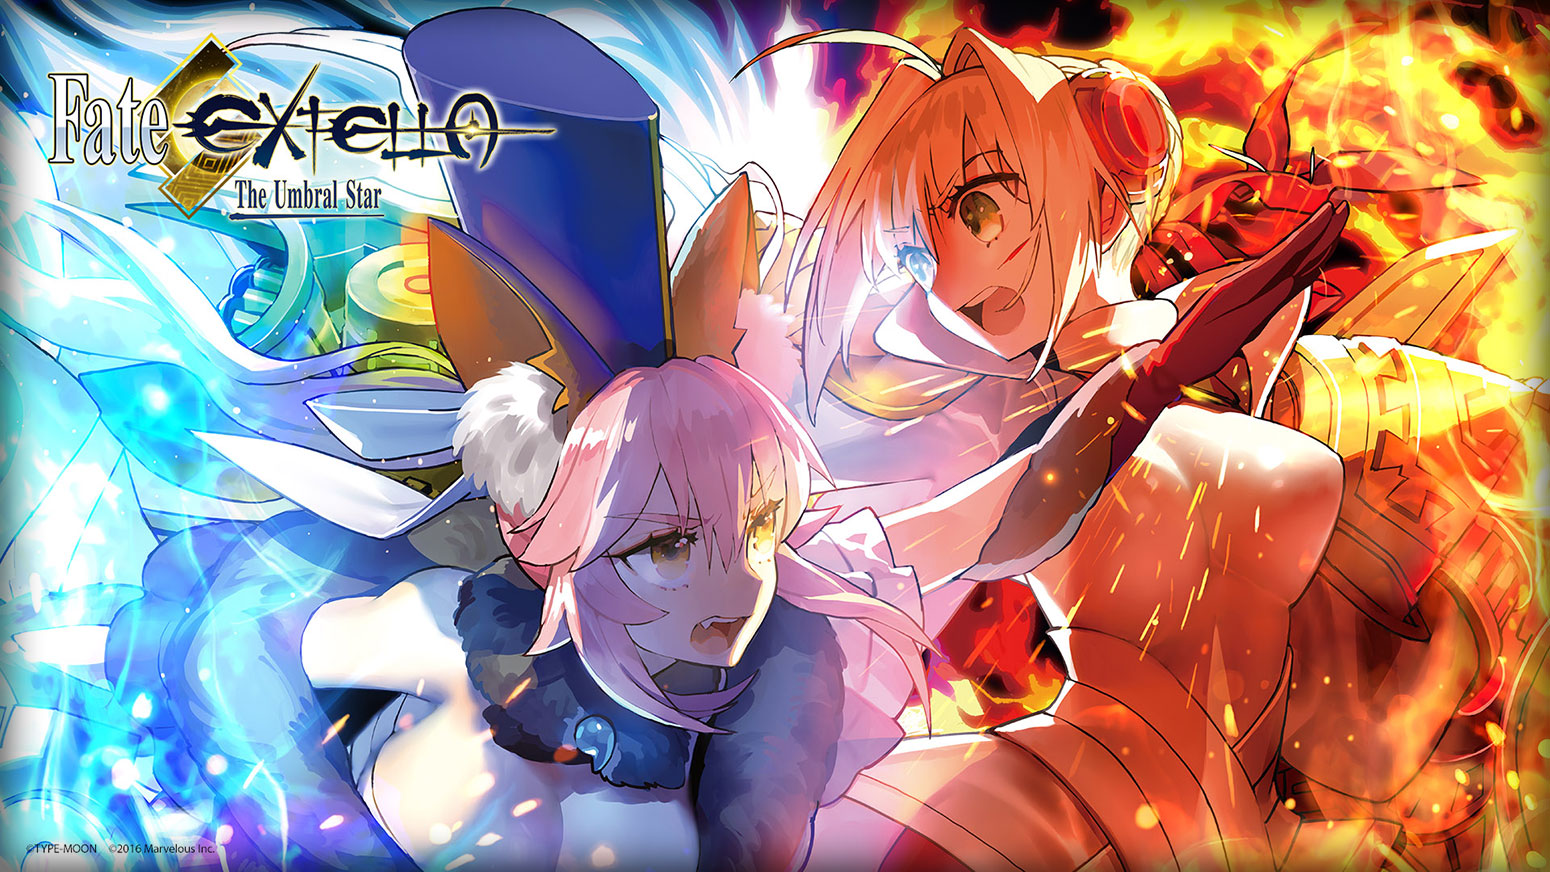 Fate/EXTELLA: The Umbral Star - Wallpaper 2